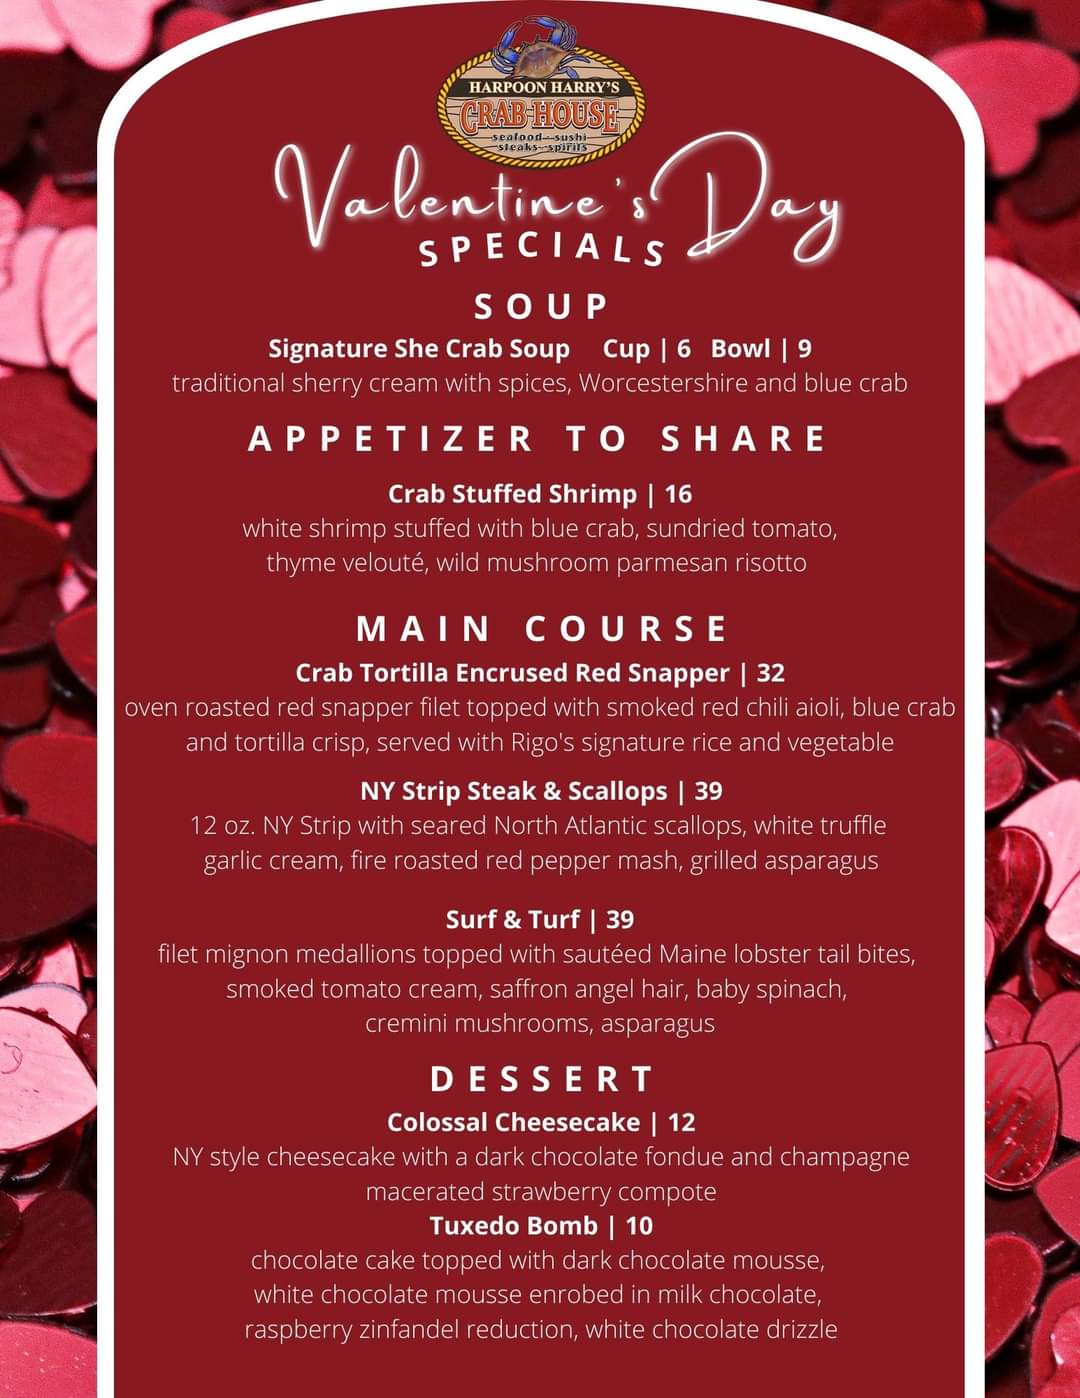 Valentine's Day Specials – Harpoon Harry's Crab House in Pigeon Forge, TN